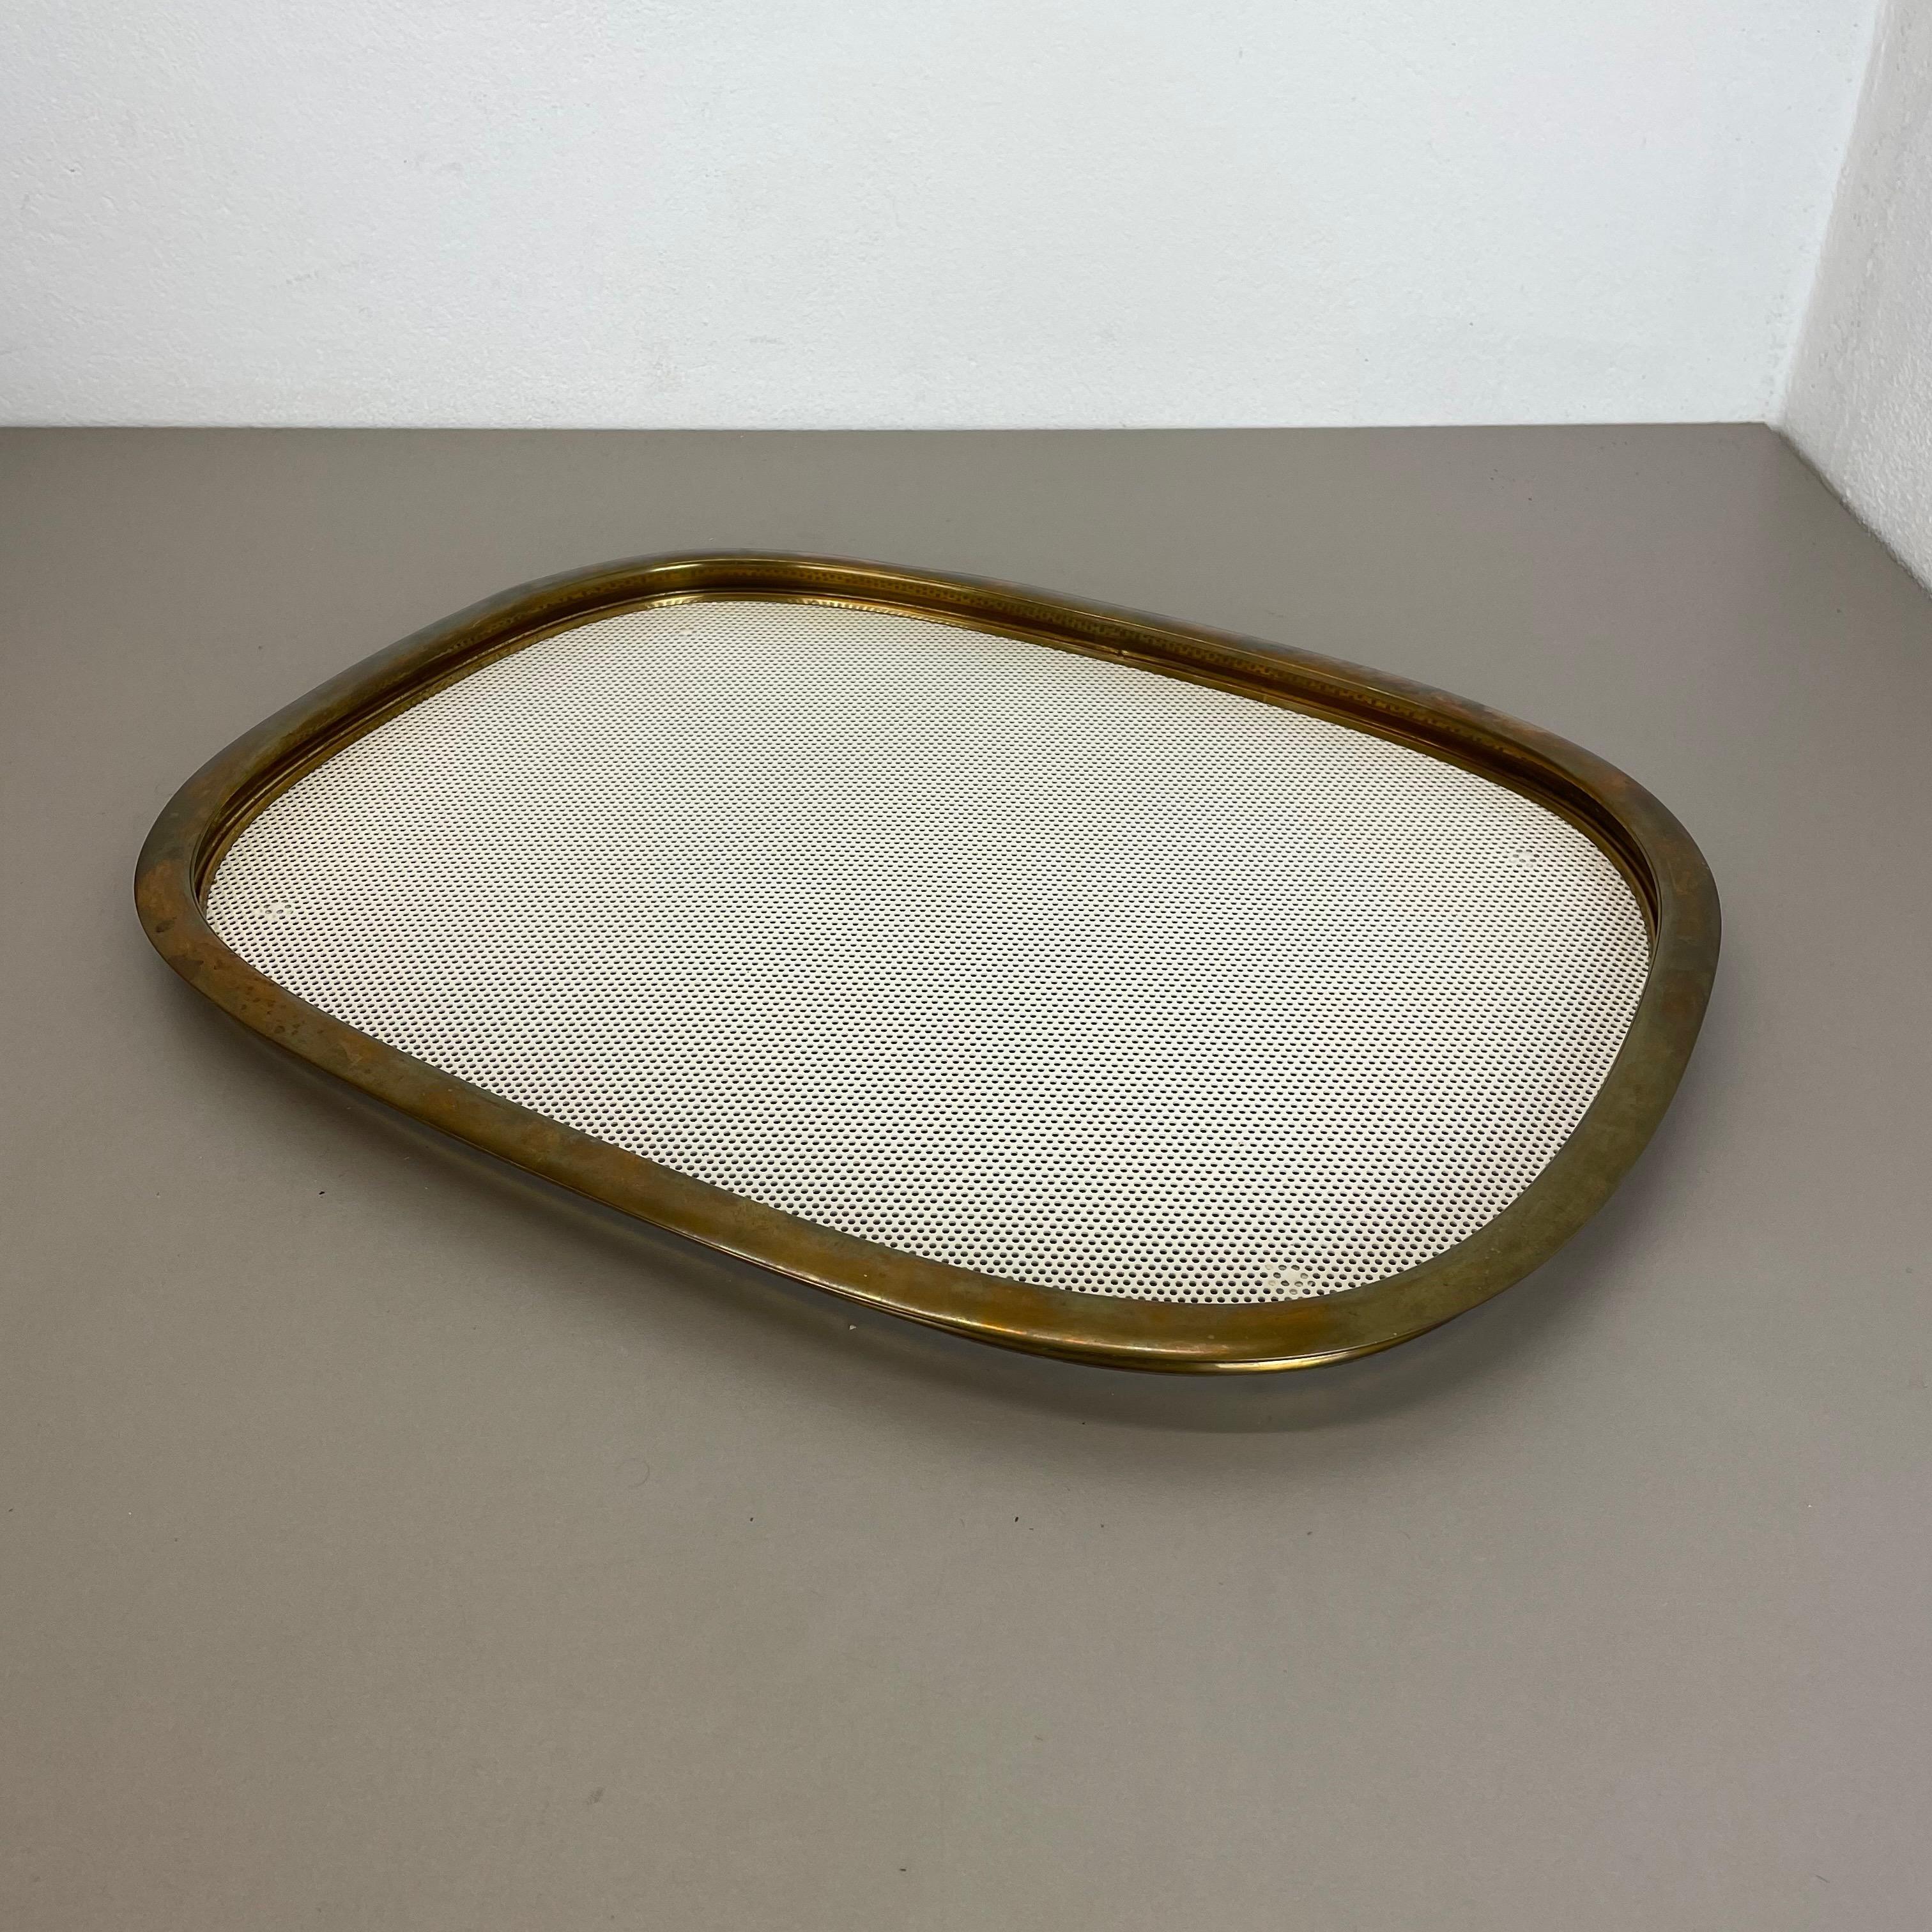 Article:

Tray element with hole pattern


Producer:

Vereinigte Werkstätten München


Origin:

Germany


Material:

metal and brass


Decade:

1960s


Description:

This original midcentury tray element was produced in the 1960s in Germany by the